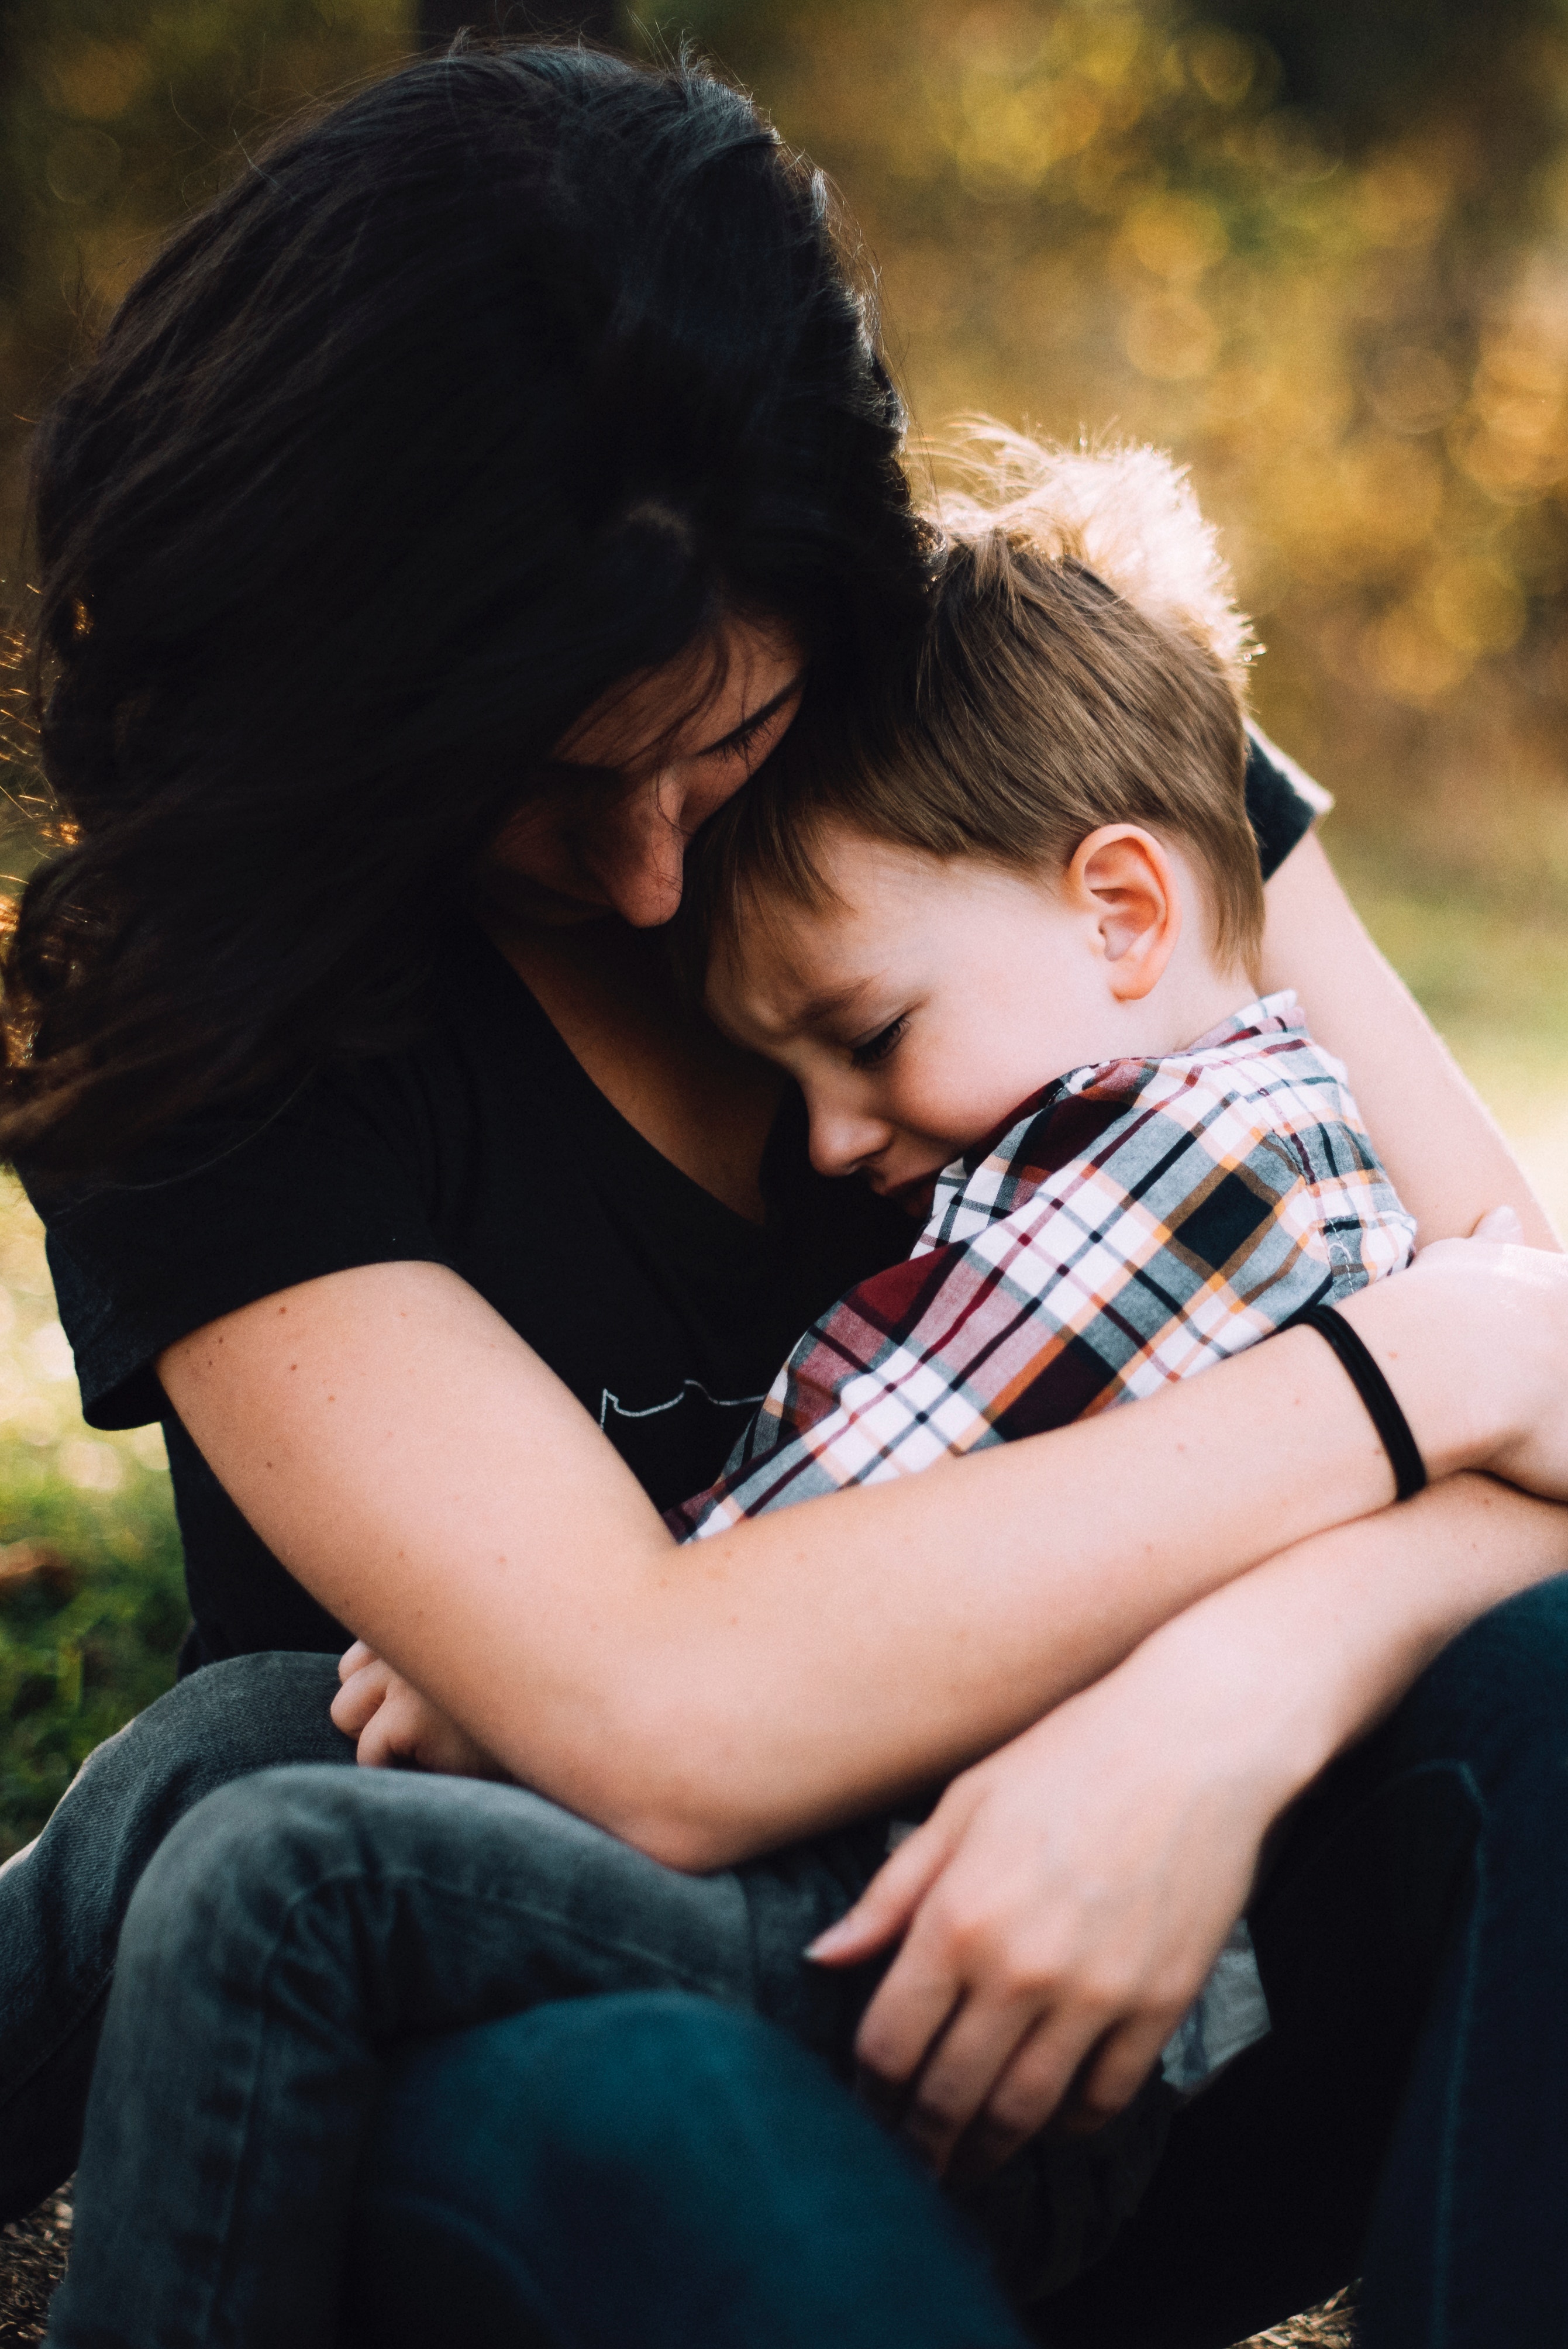 4 Key Truths that Make Mindful Parenting Work